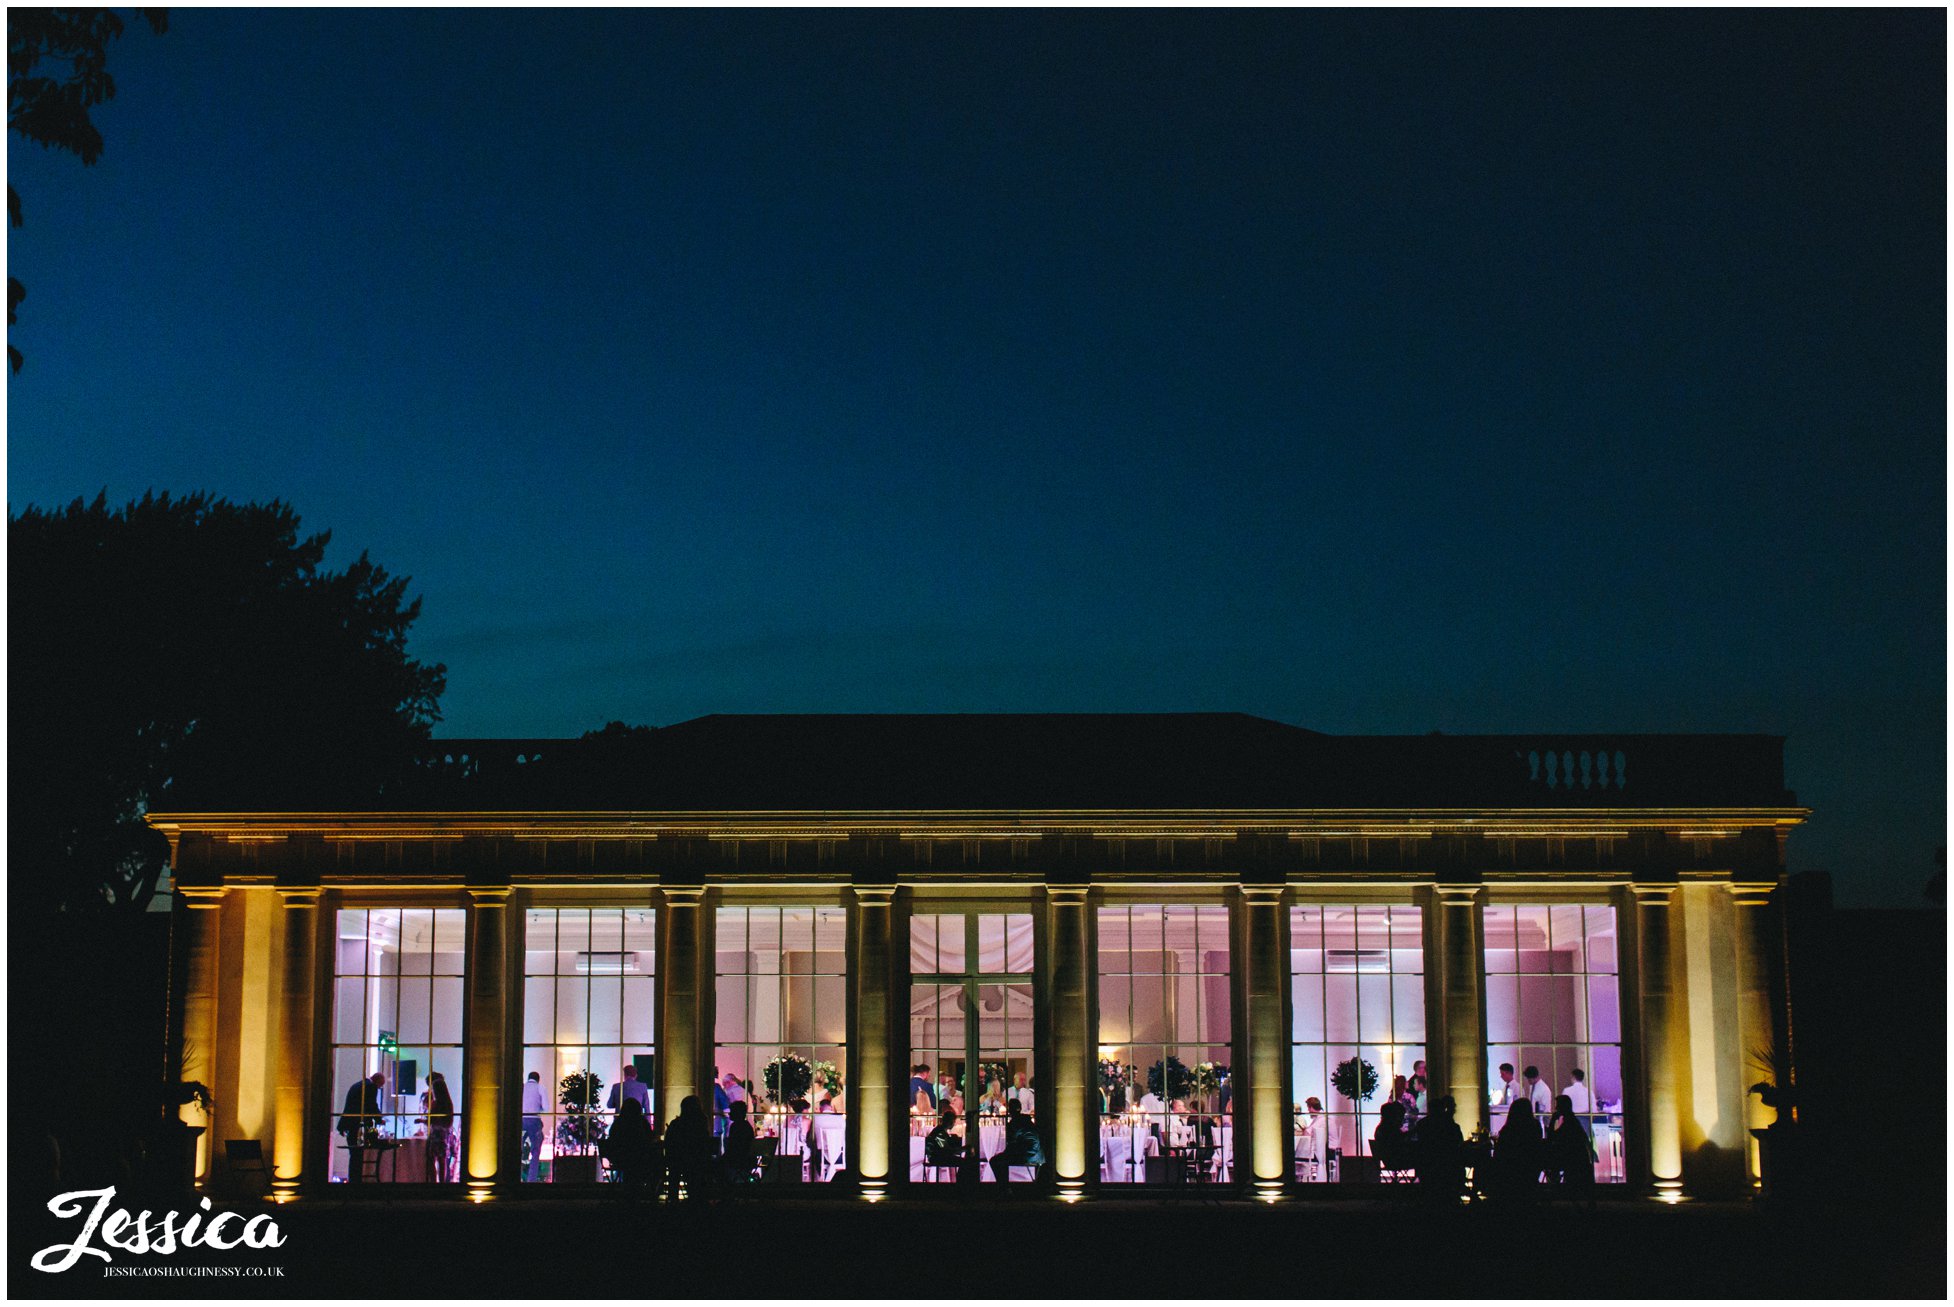 stubton hall lit up at night for the evening reception